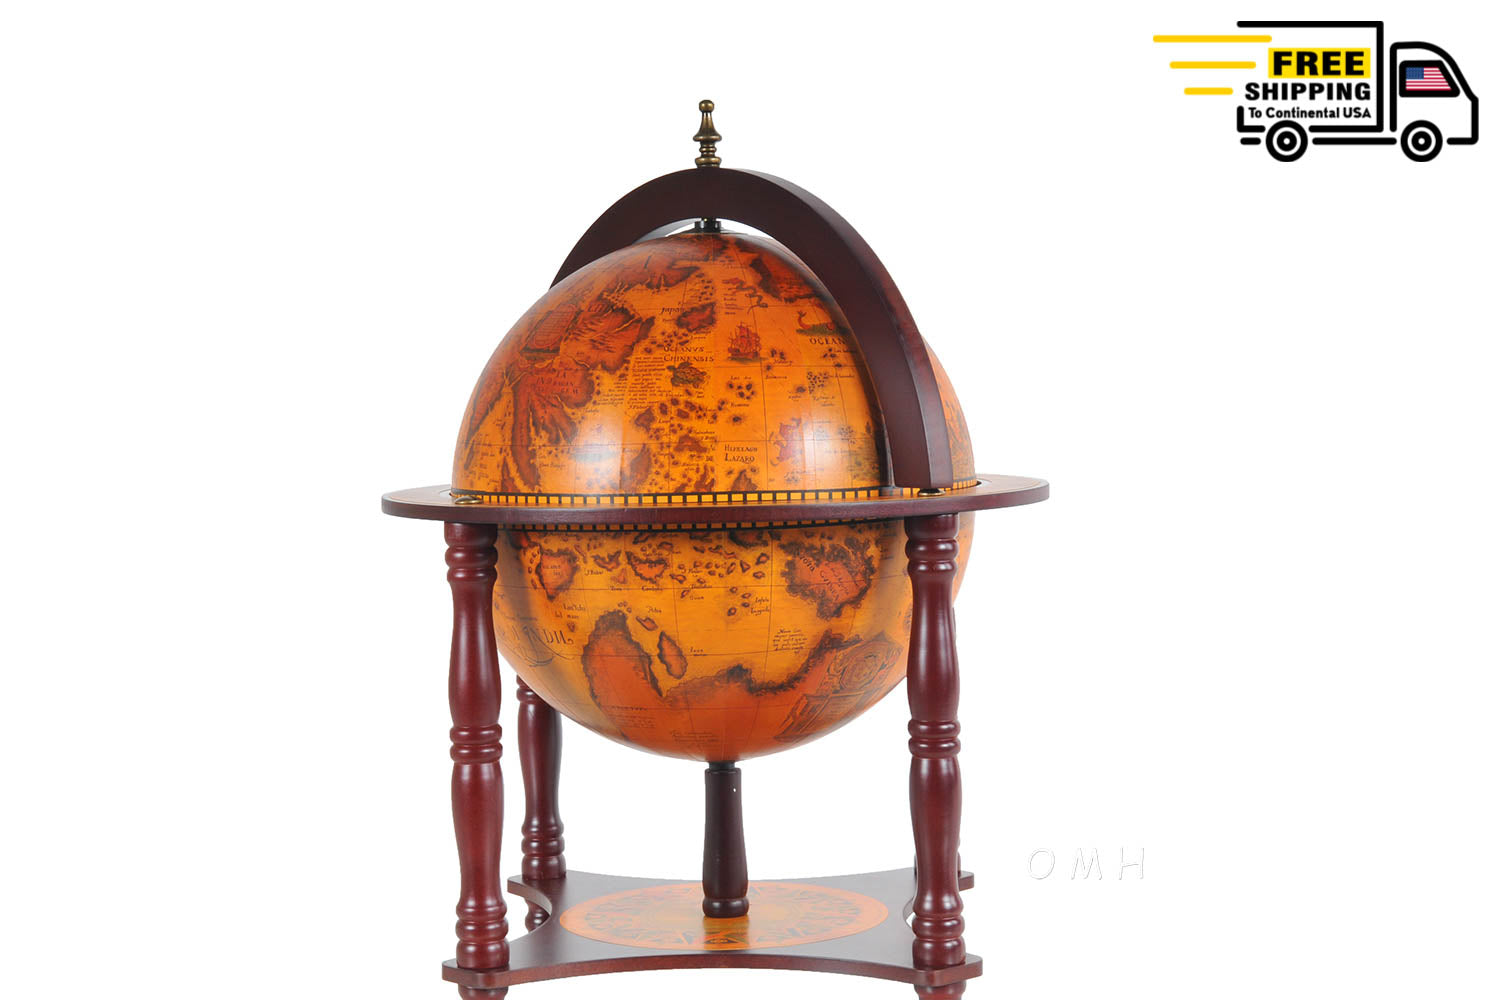 Red Globe 13 inches with chess holder | Handcrafted Antique finish | Vintage arts and crafts